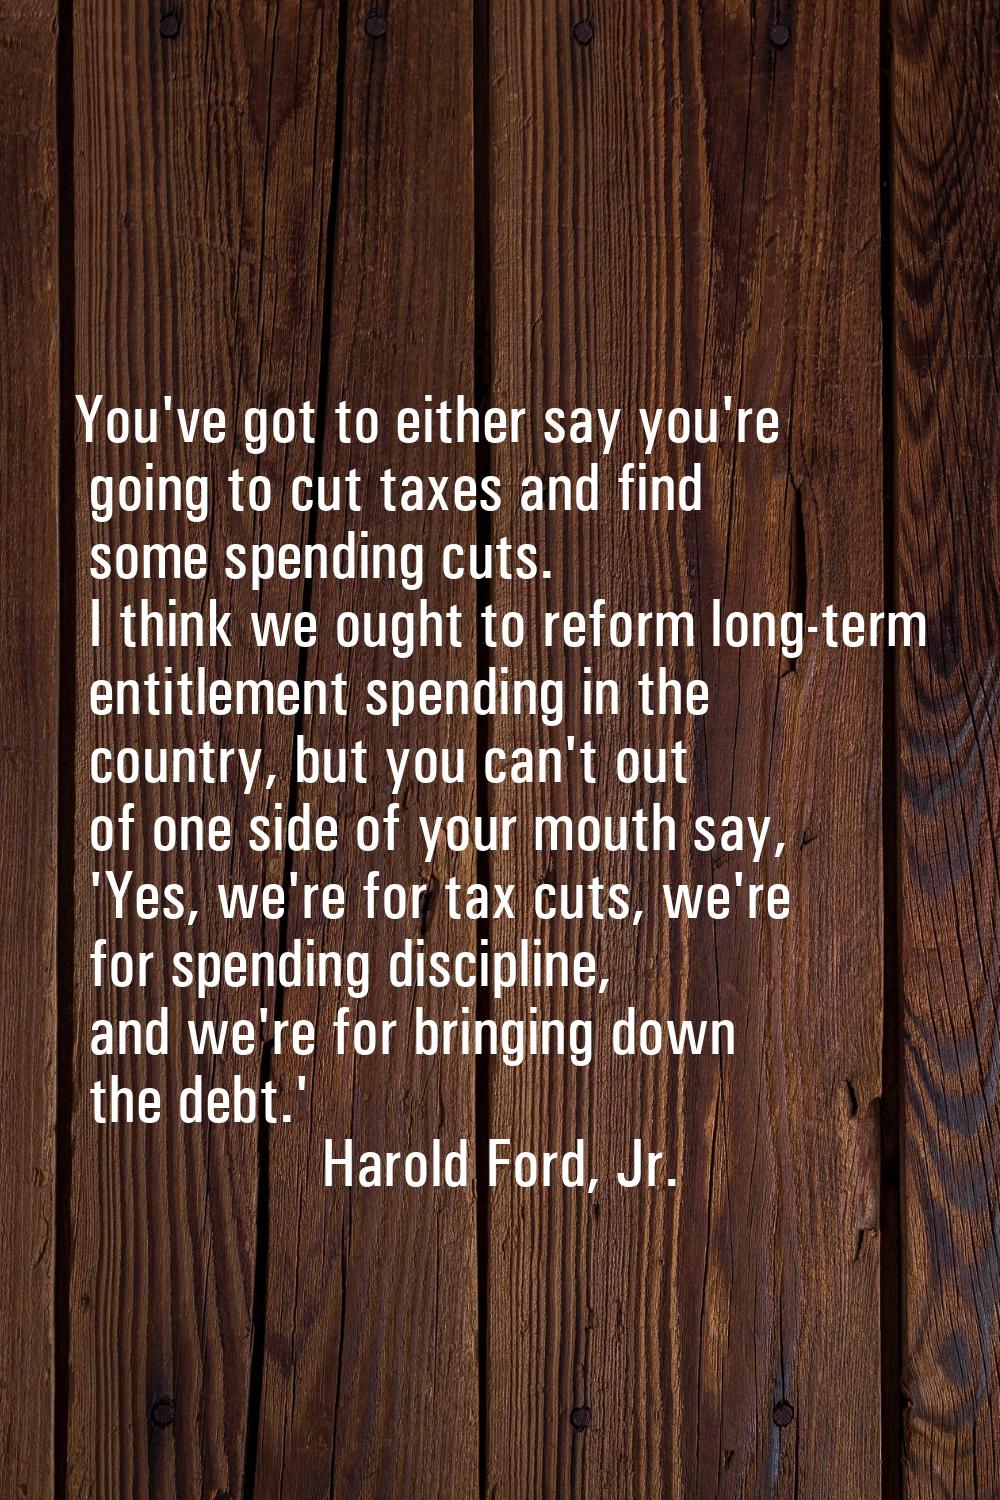 You've got to either say you're going to cut taxes and find some spending cuts. I think we ought to